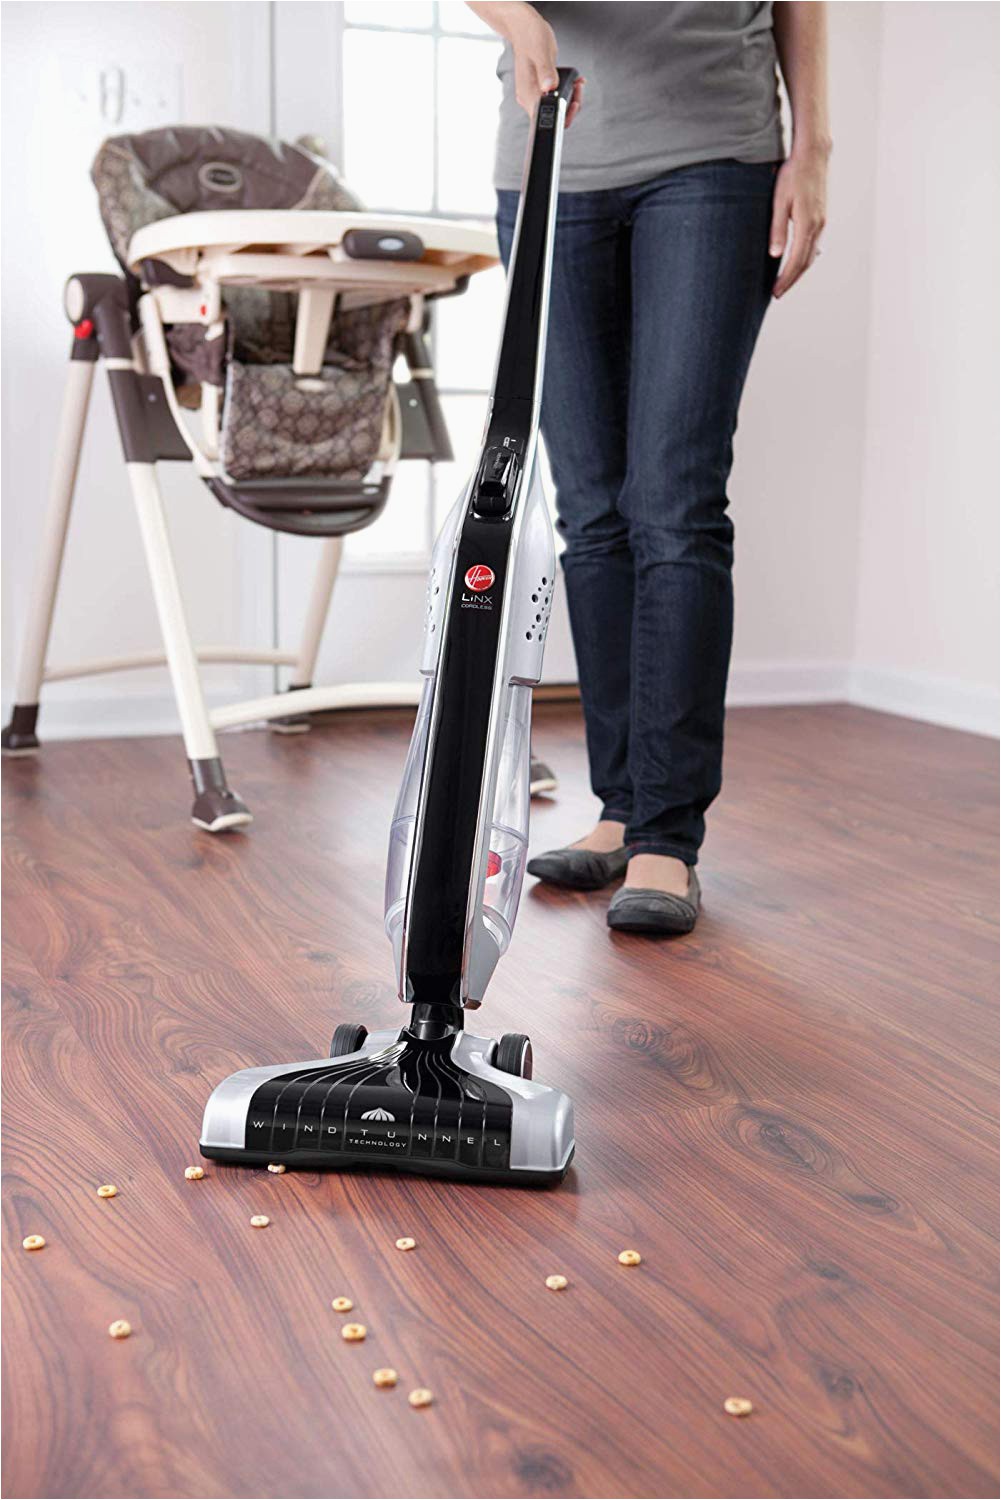 Best Vacuum for Hardwood and area Rugs 10 Best Vacuum for Hardwood Floors Reviews In 2020 Buying